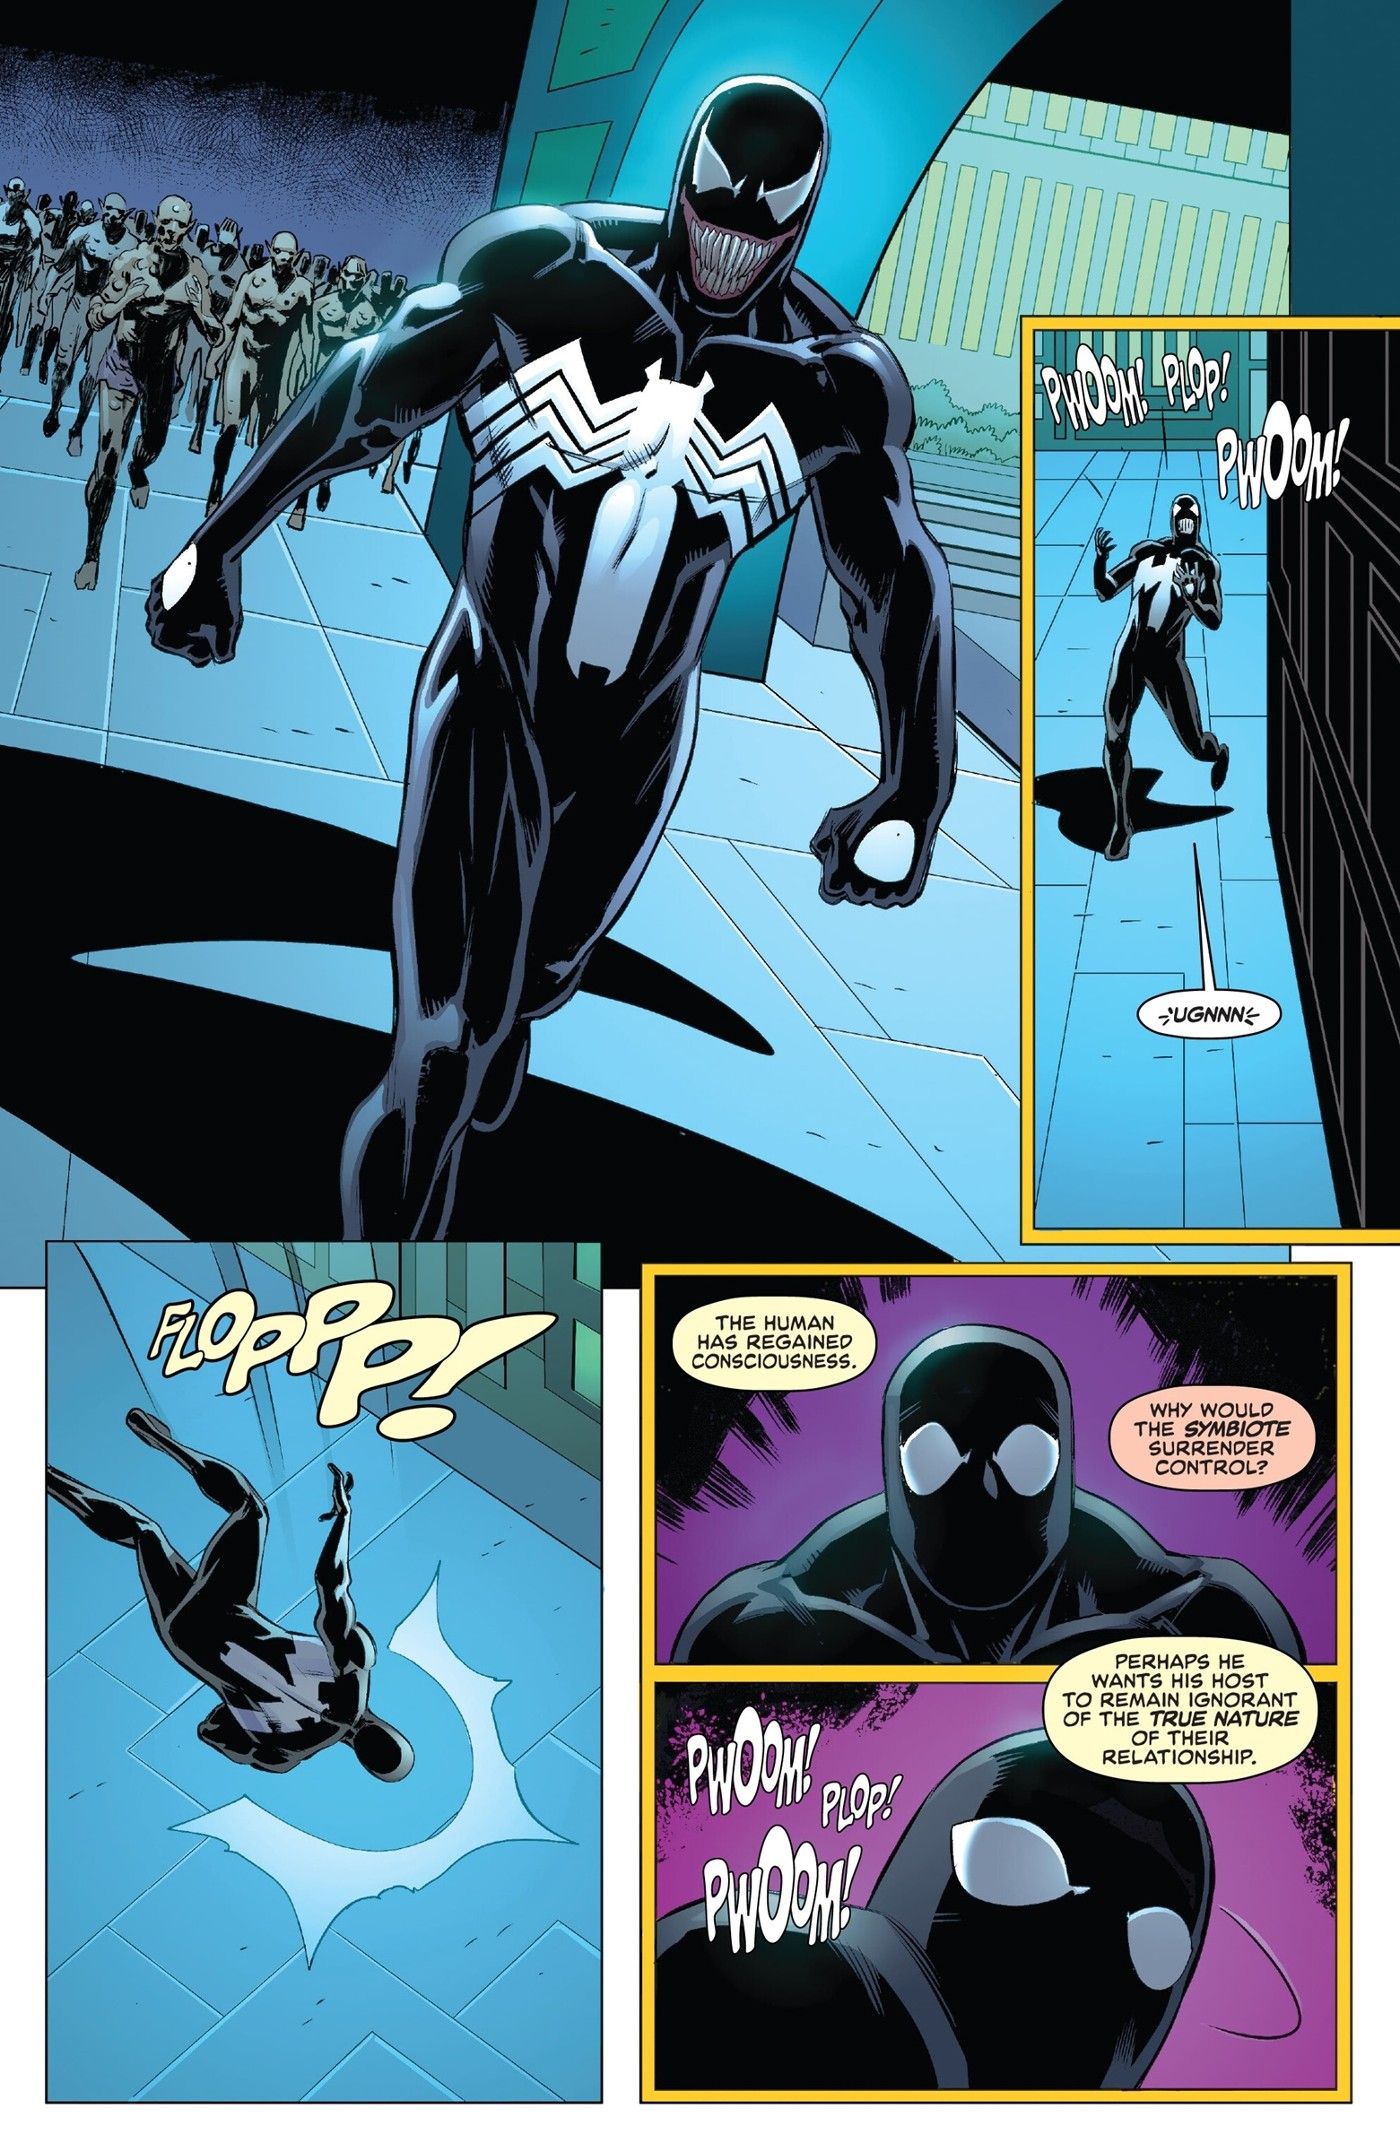 Five panels of Venom leading an army